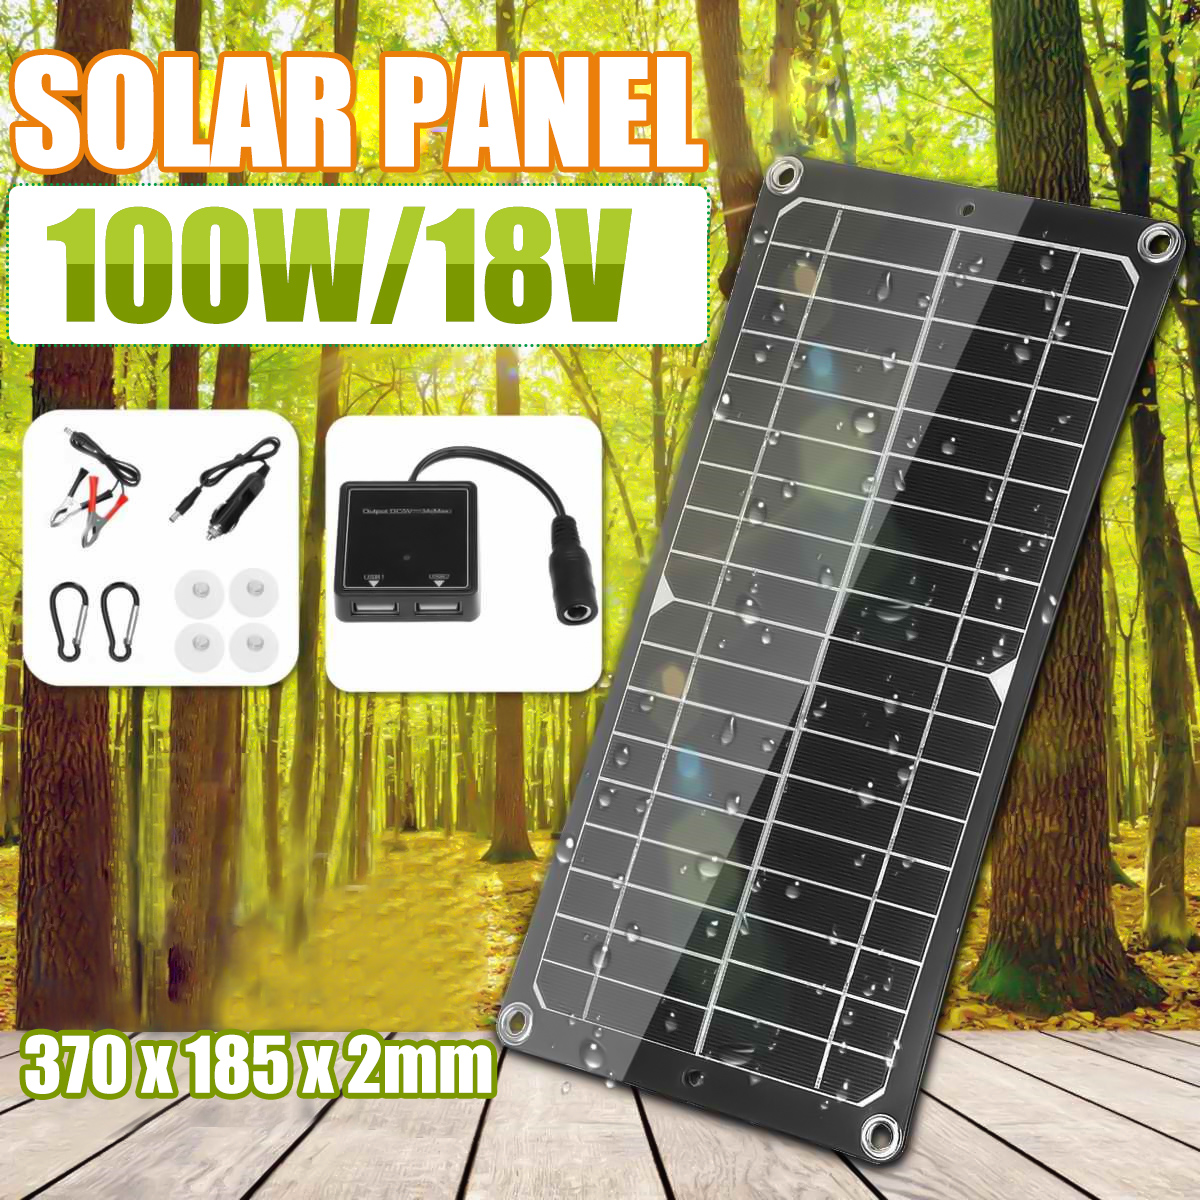 100W-18V-Monocrystalline-Solar-Panel-Dual-USB-Portable-Battery-Charger-Car-RV-Boat-Portable-Charger--1856131-1